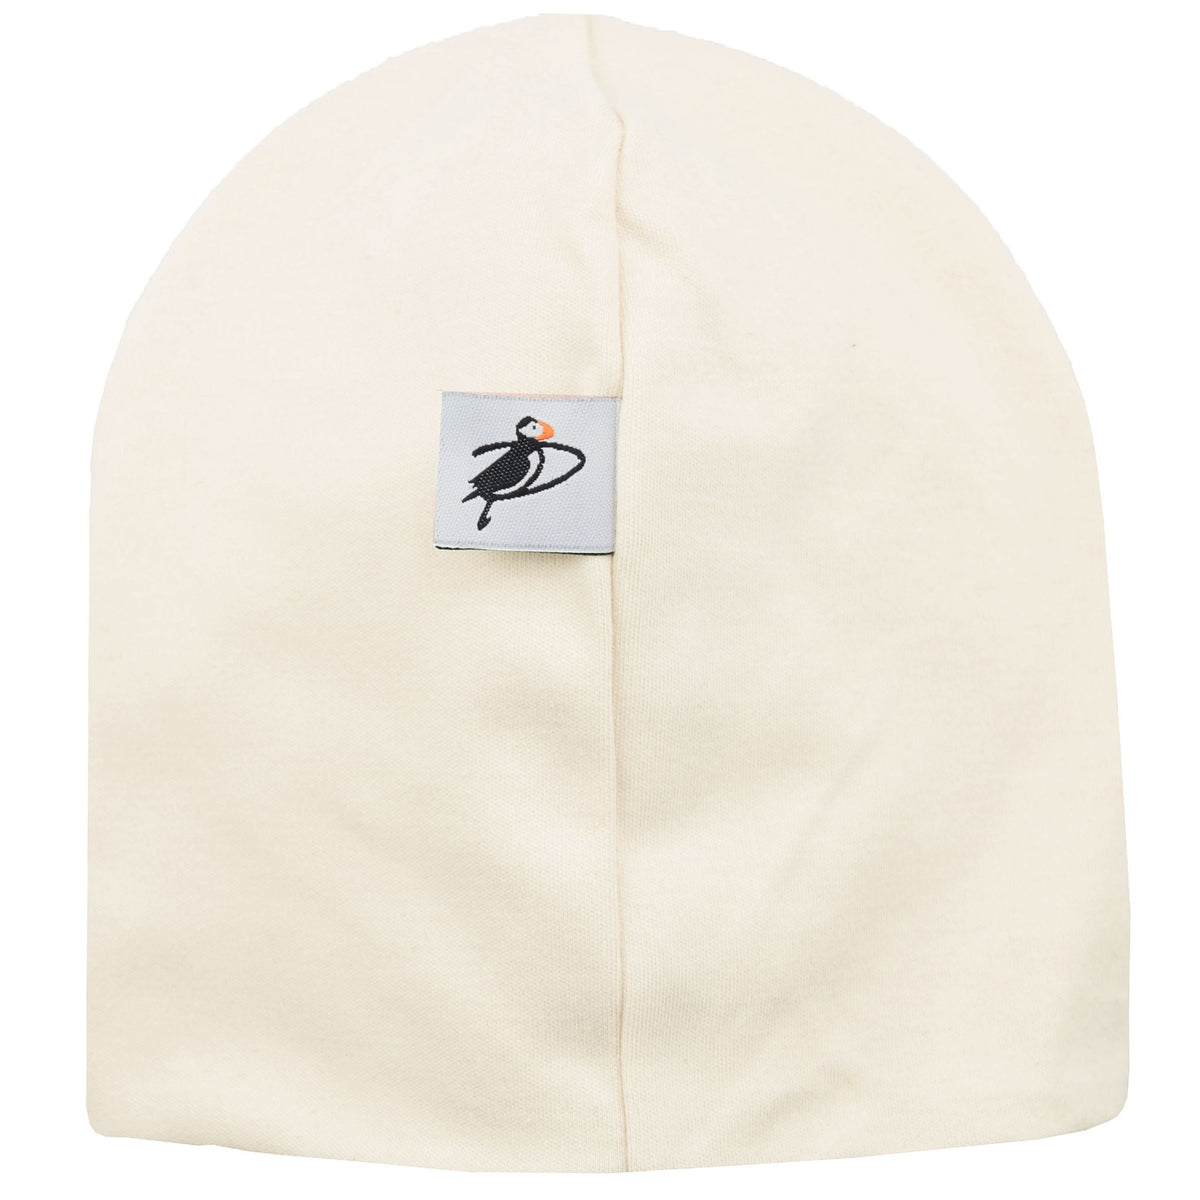 Puffin Gear Infant, Preemie and Toddler Organic Cotton Beanie-Made in Canada-Natural